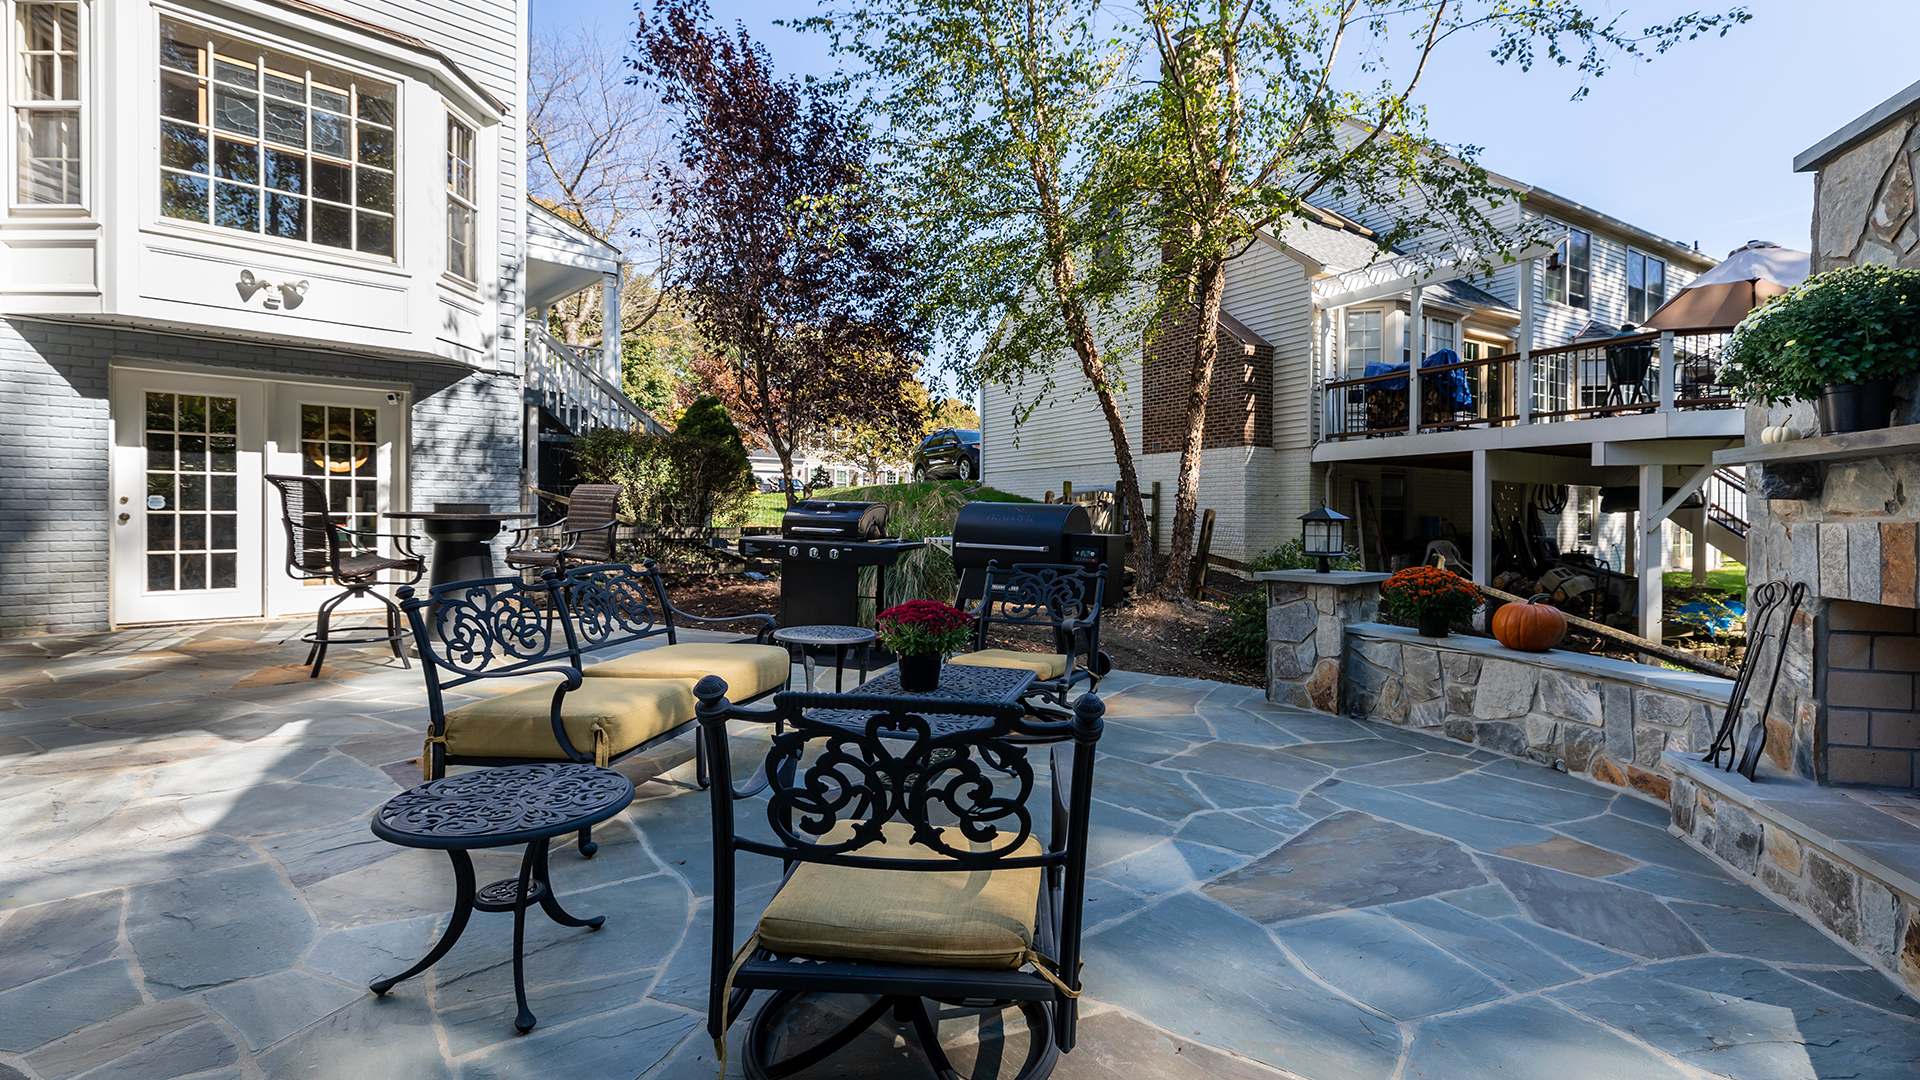 2021 NARI Metro DC Coty FINALIST Residential Landscape Design-Outdoor Living $100,000 to $250,000